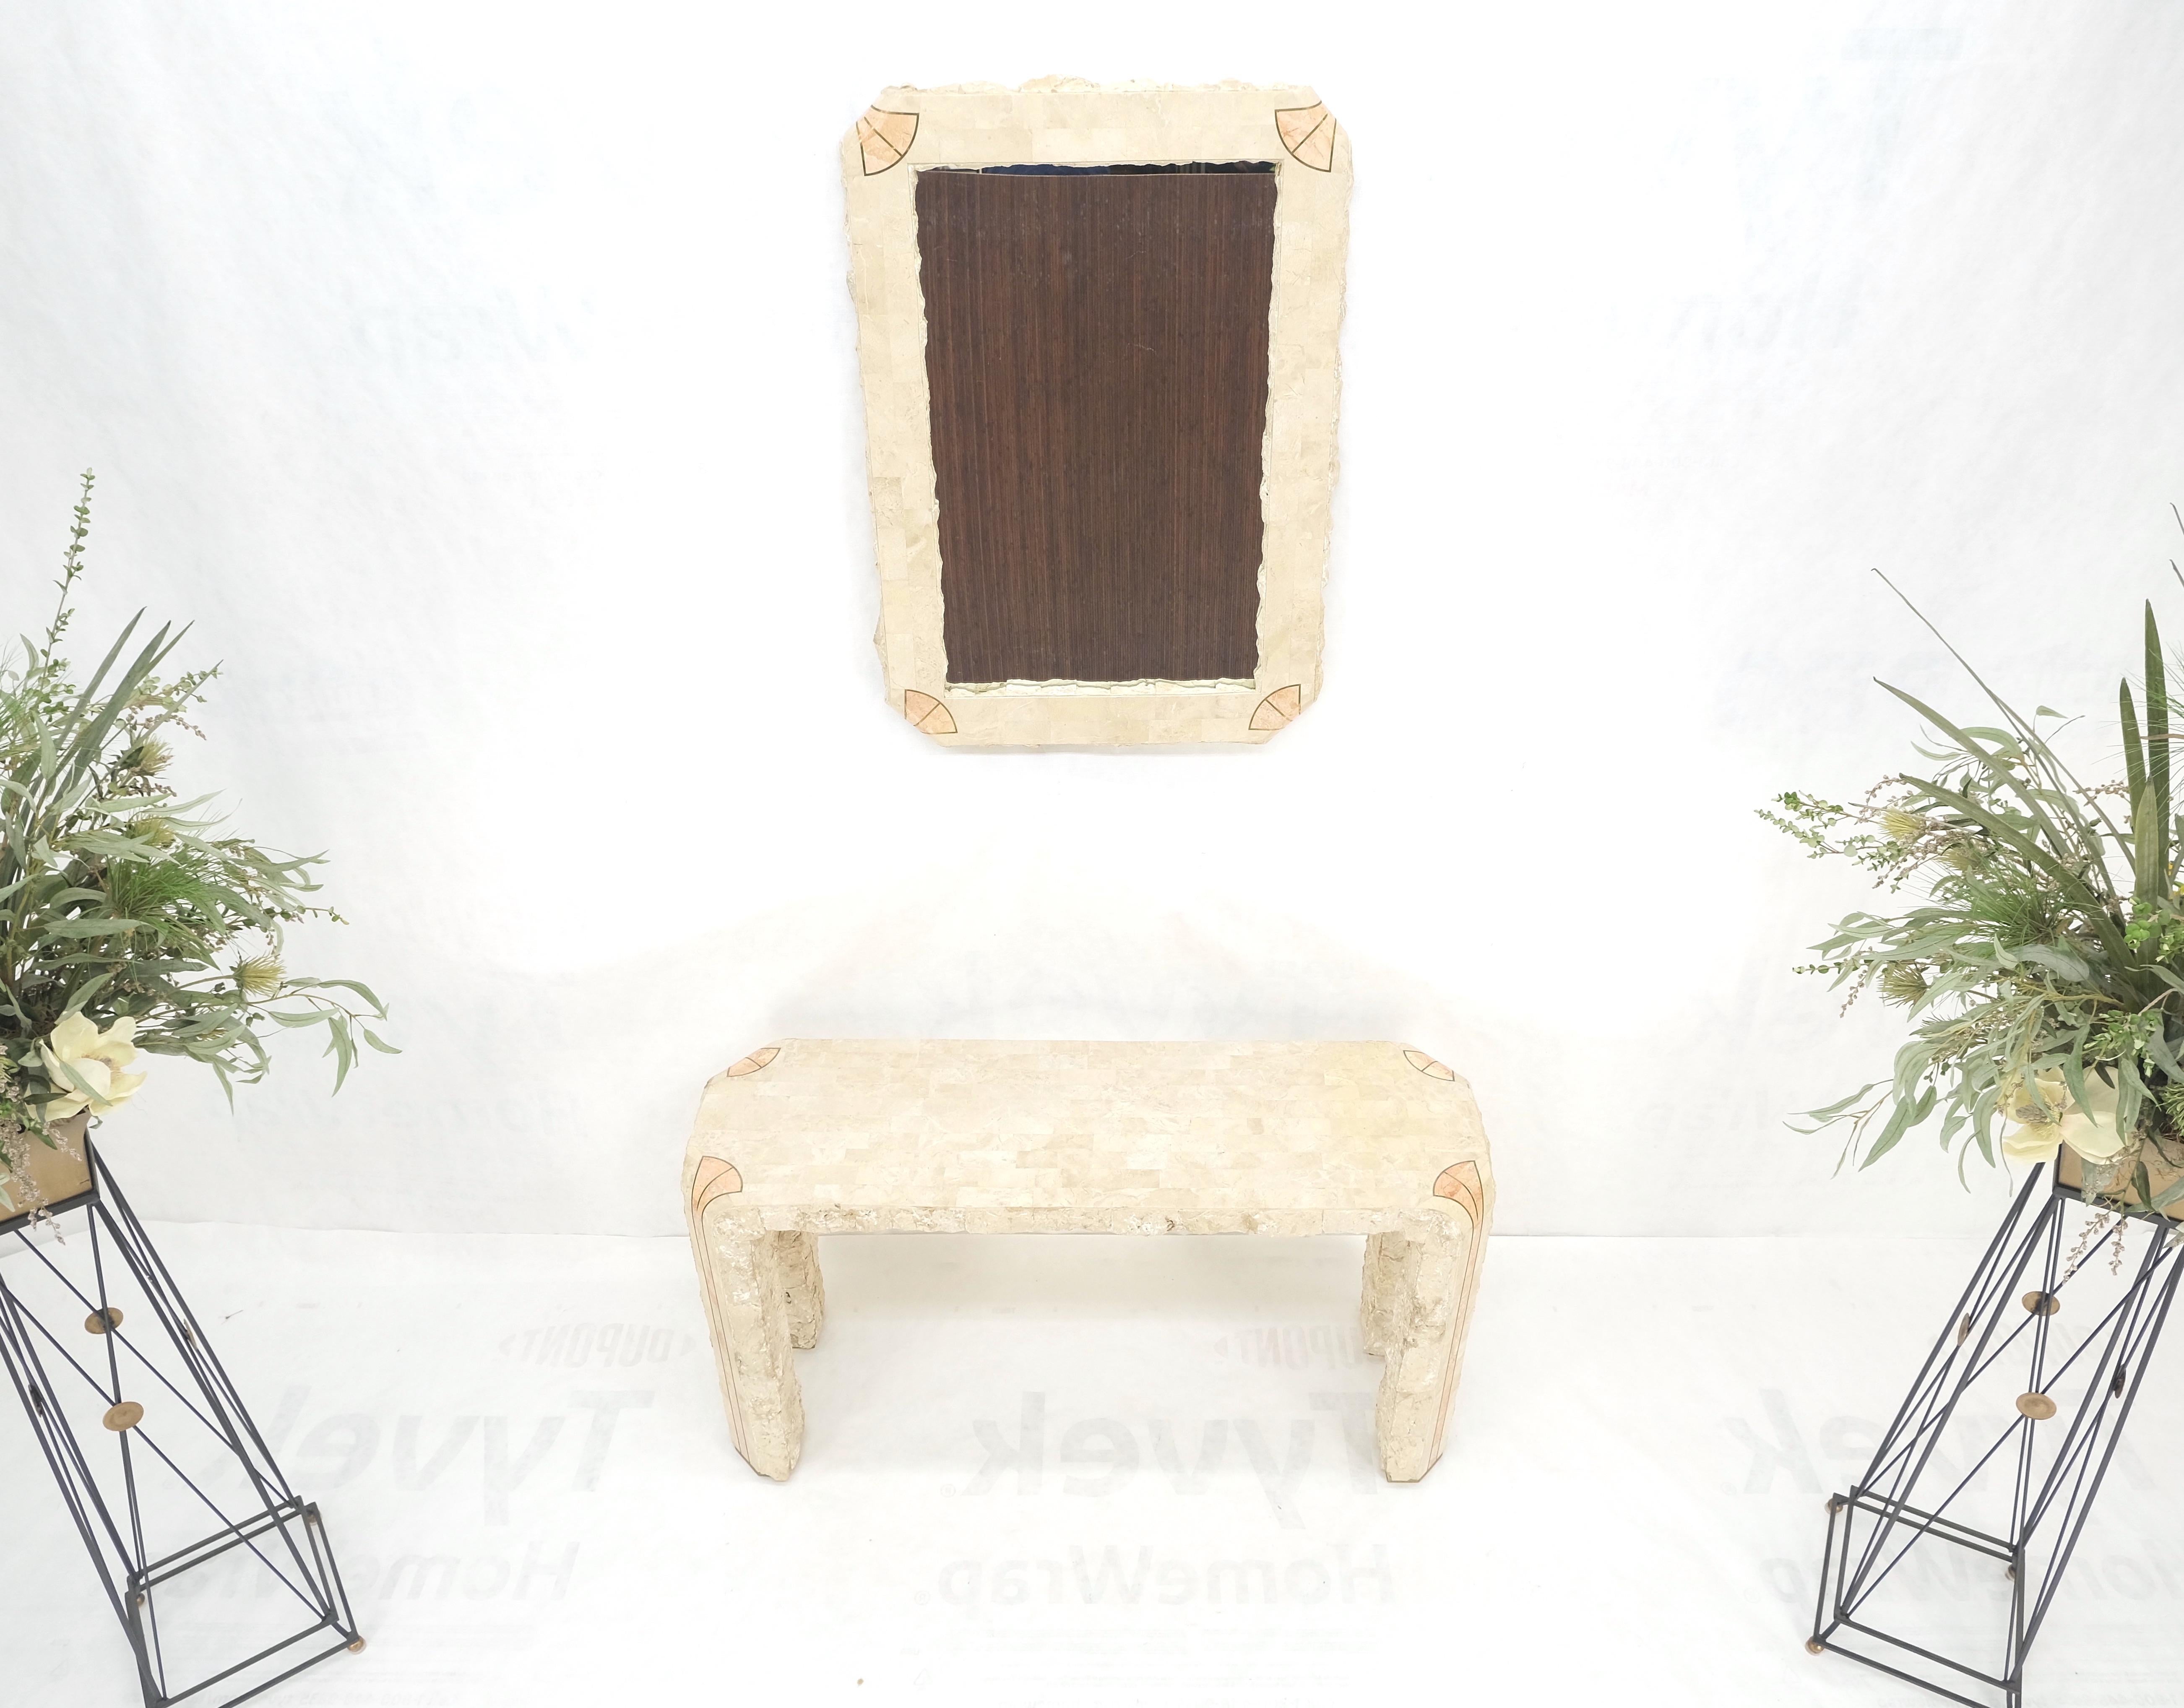 Tesselated Stone Marble Brass Inlaid Console Sofa Entry Hall  Table w/ Mirror MINT!
Mirror: 1.5x29x39.5